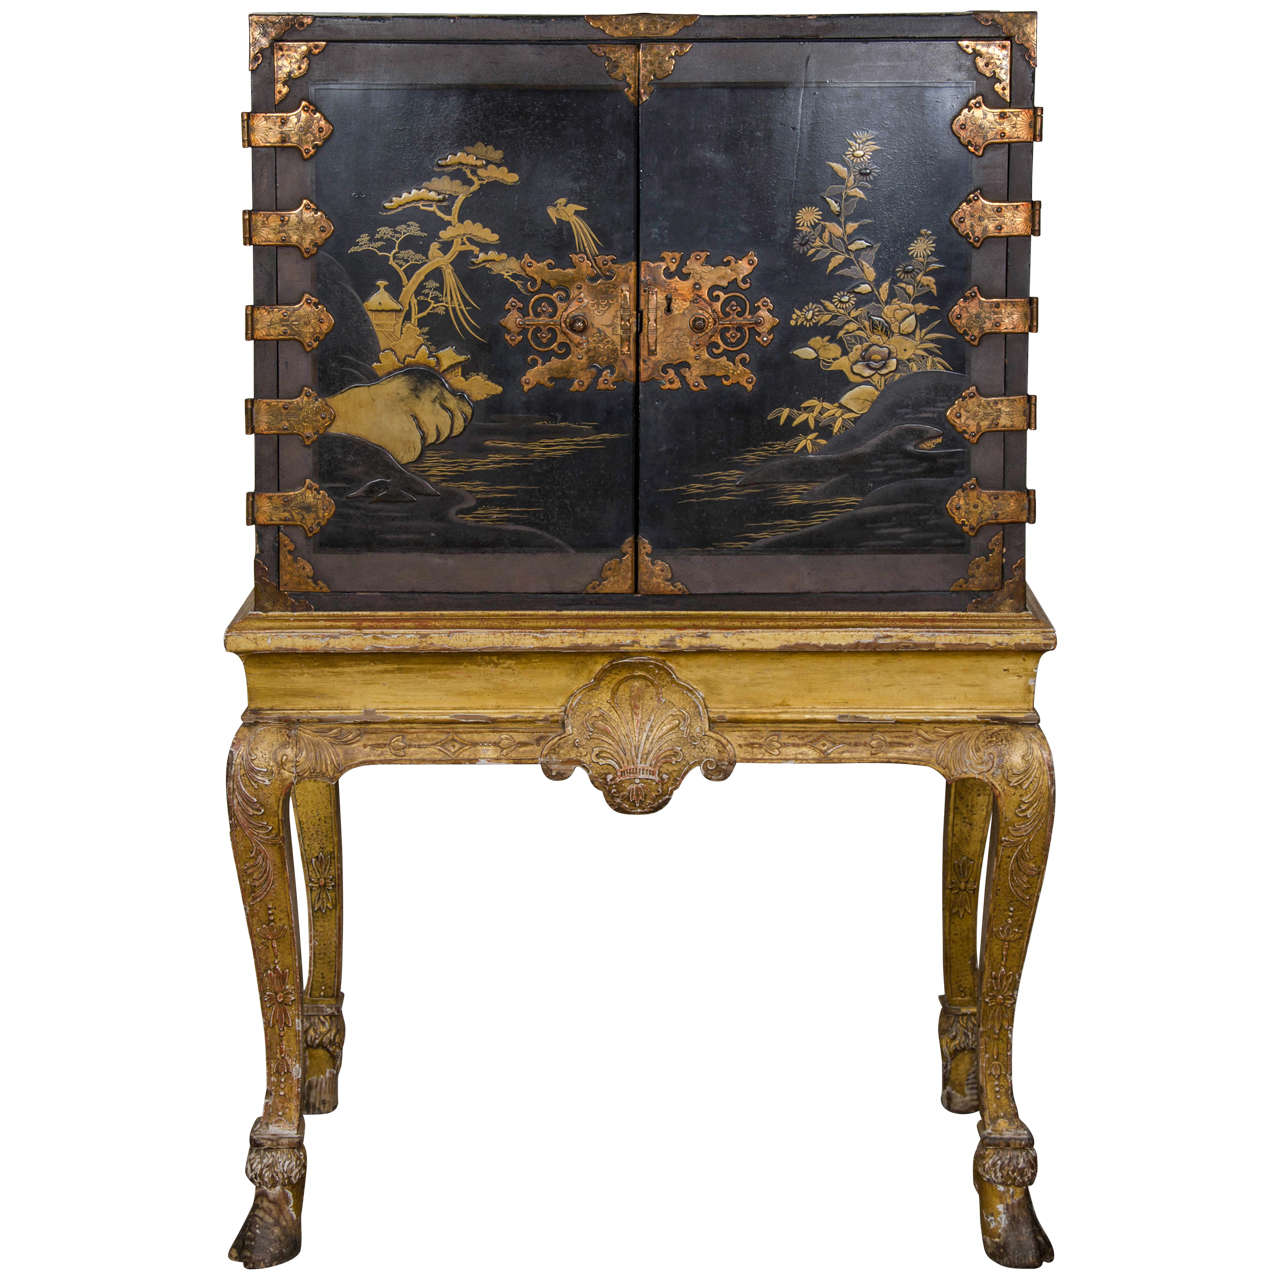 Late 17th Century Chinese Black Laquer Cabinet